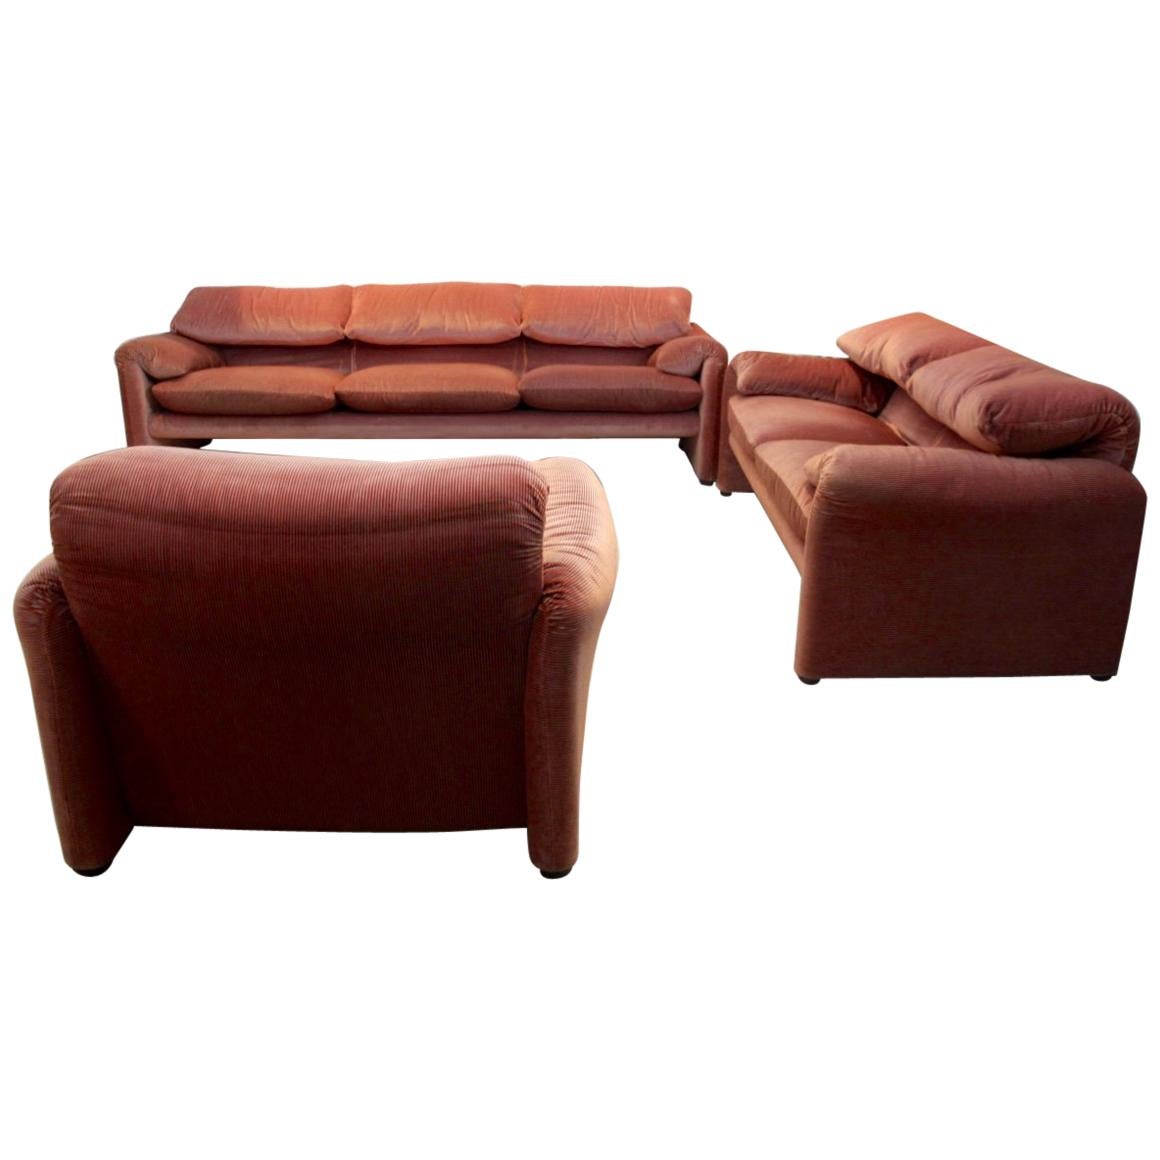 Unique 3-Piece Maralunga Seating Group by Vico Magistretti for Cassina, Italy 19